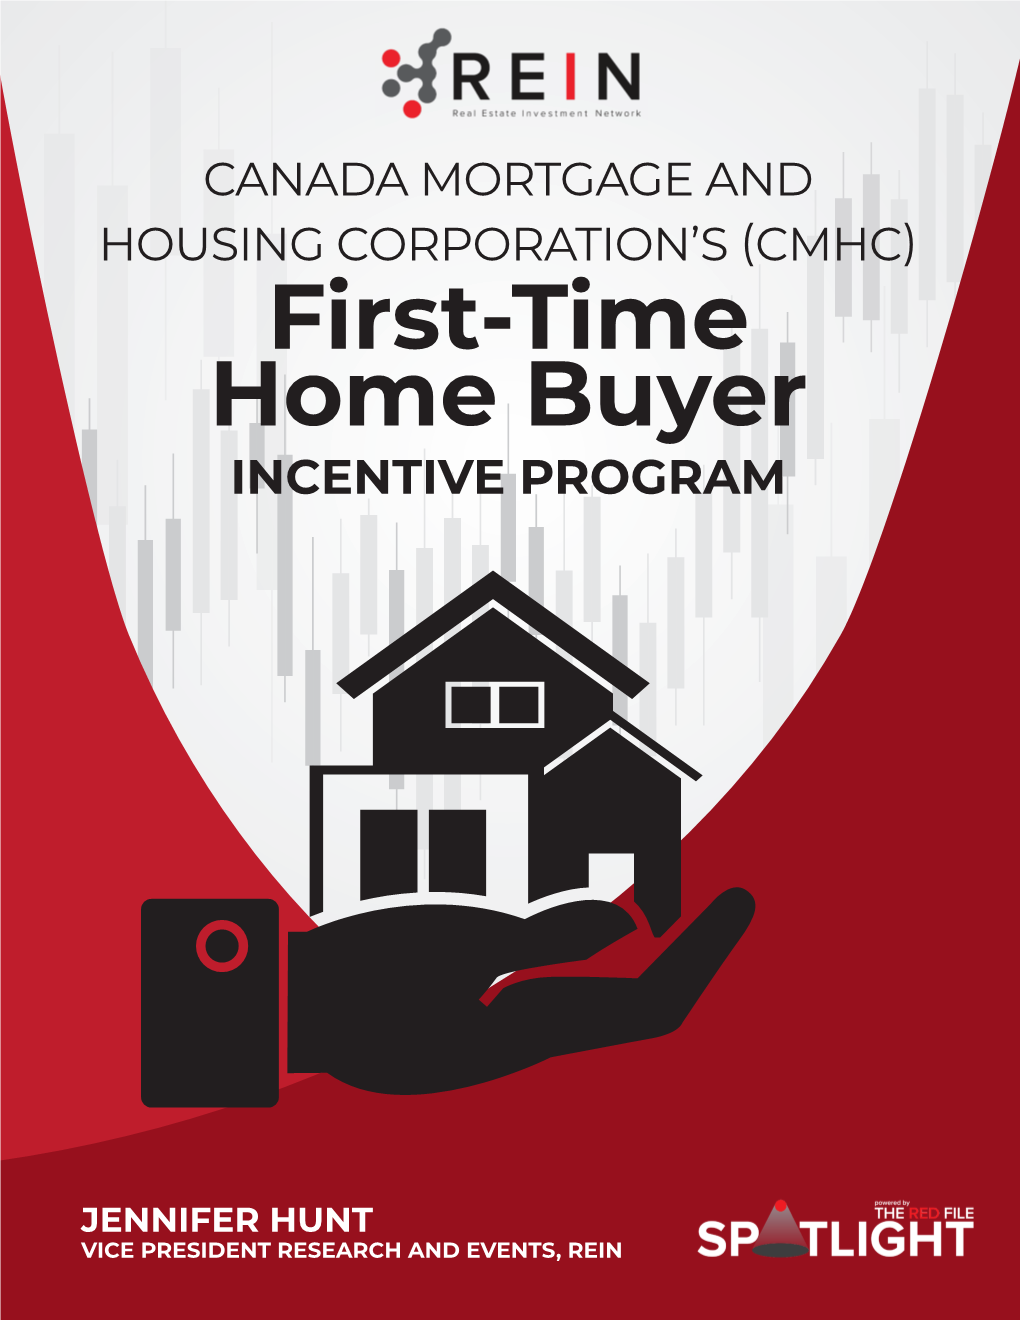 First-Time Home Buyer INCENTIVE PROGRAM